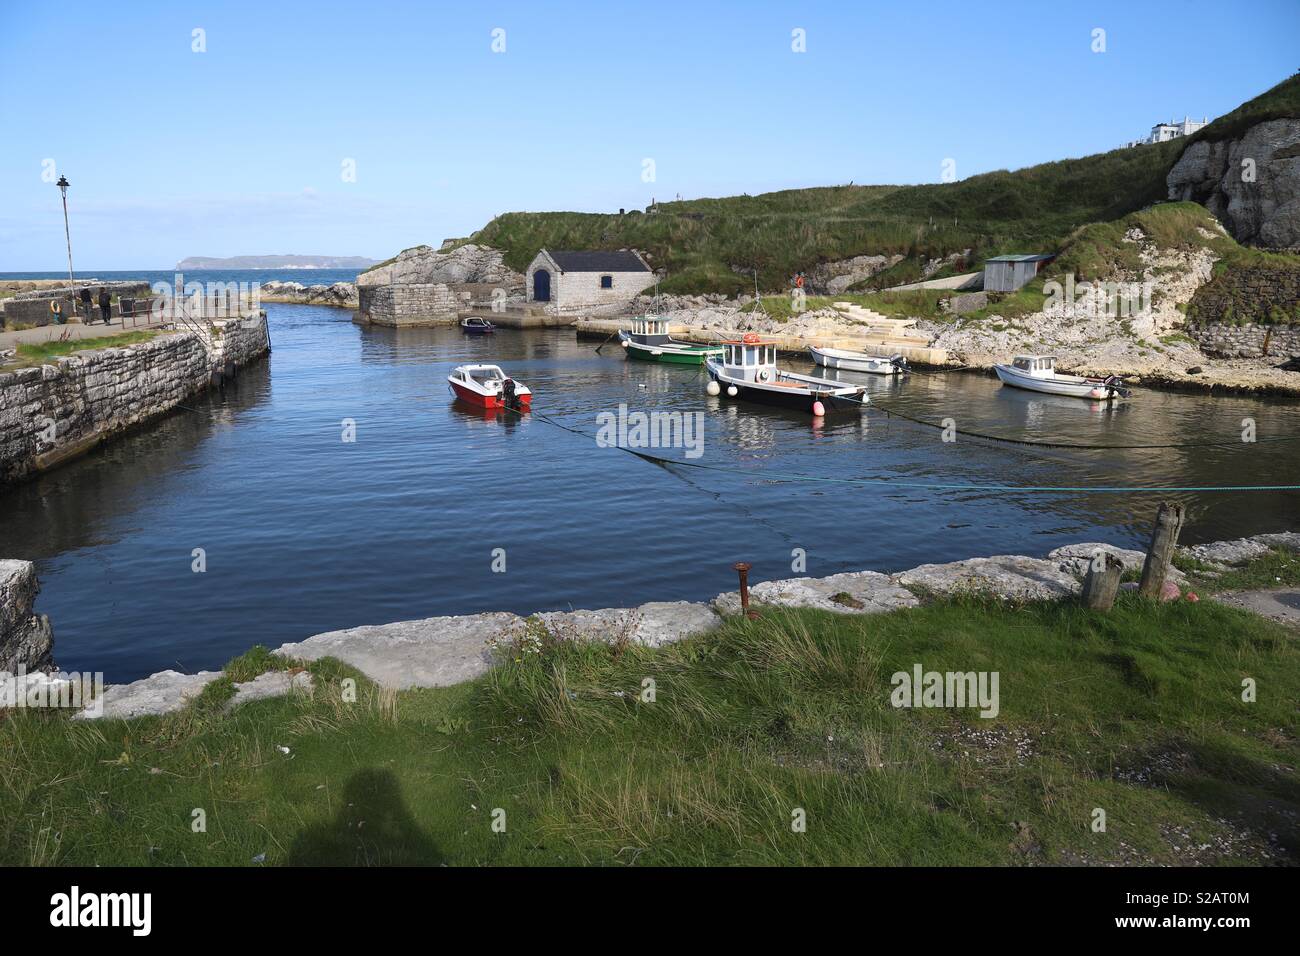 Ballintoy Harbour, Co. Antrim located on the Causeway Coastal Route, Northern Ireland-one of the locations used to film Game of Thrones. Stock Photo